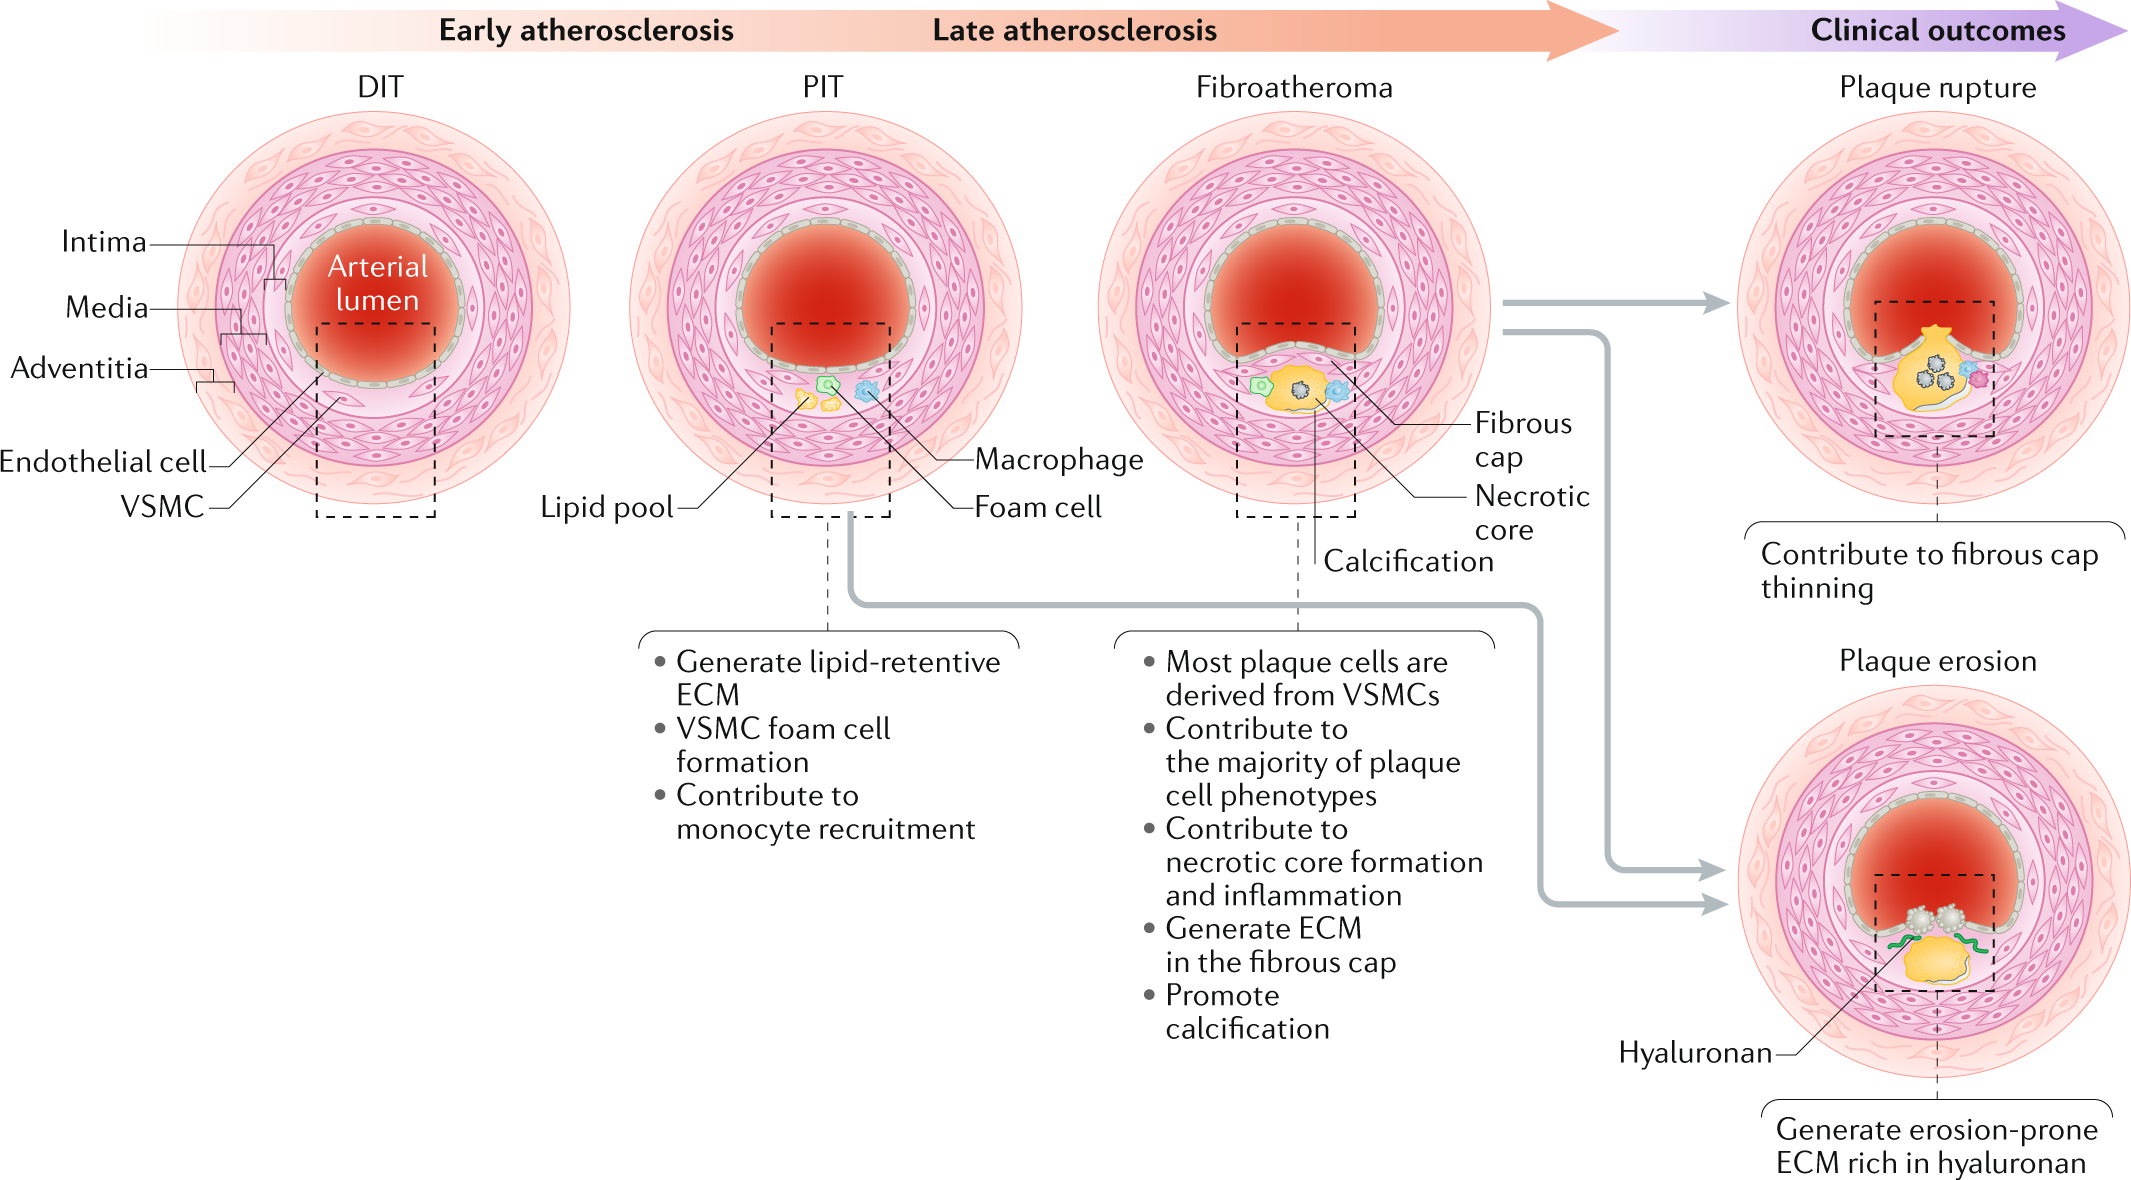 Vascular smooth muscle cells in atherosclerosis | Nature Reviews Cardiology